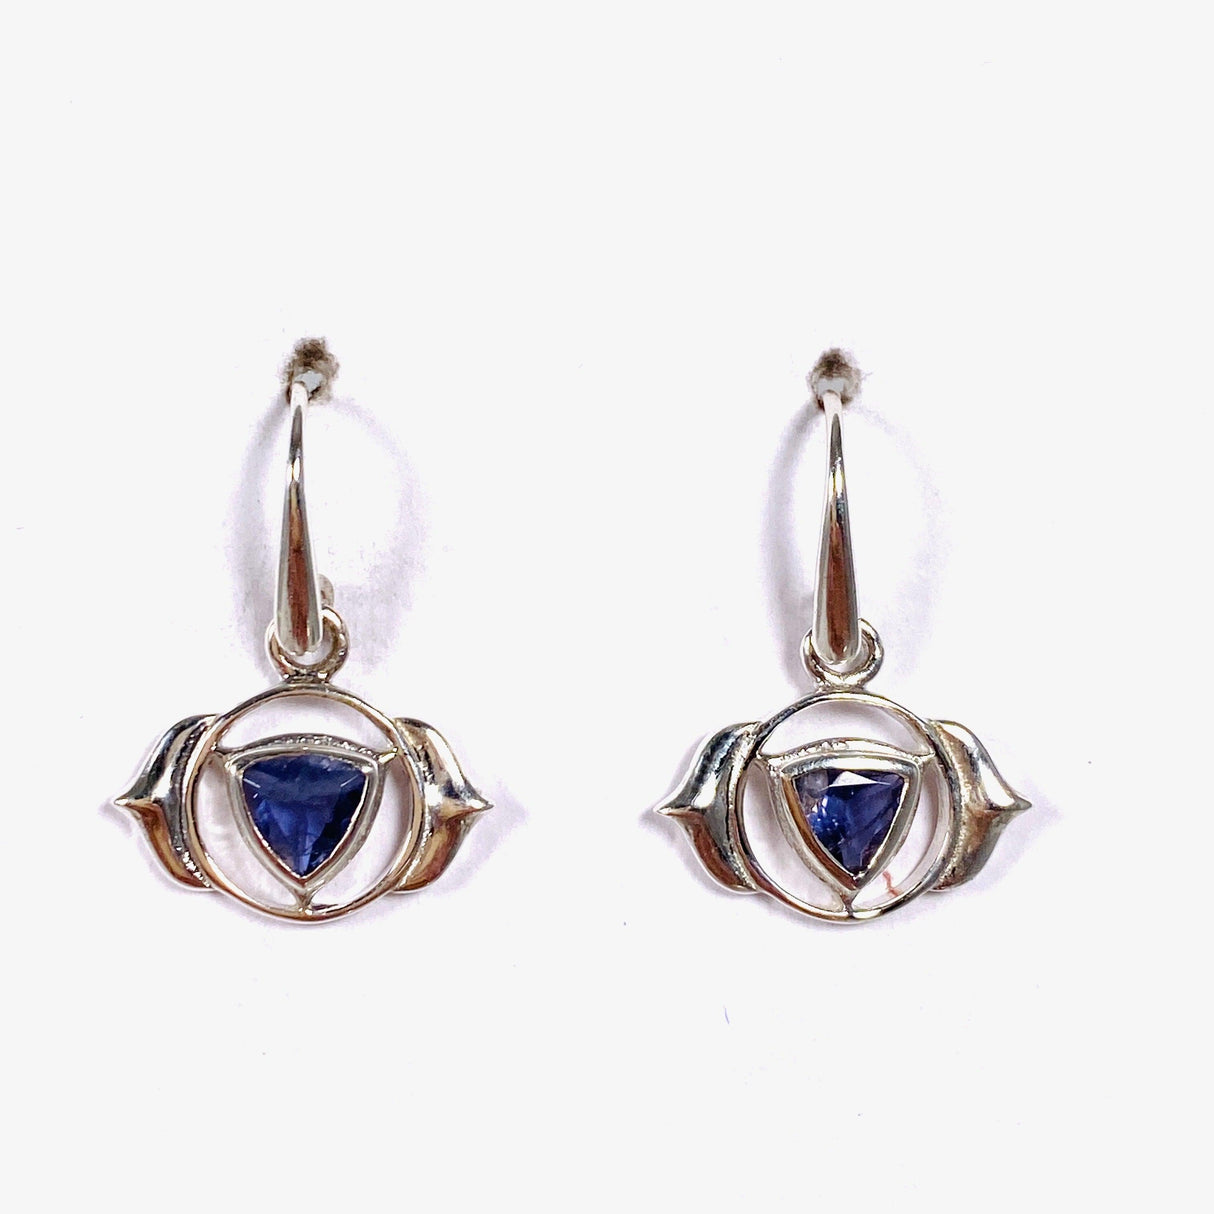 Chakra Earring with faceted gemstones - Nature's Magick